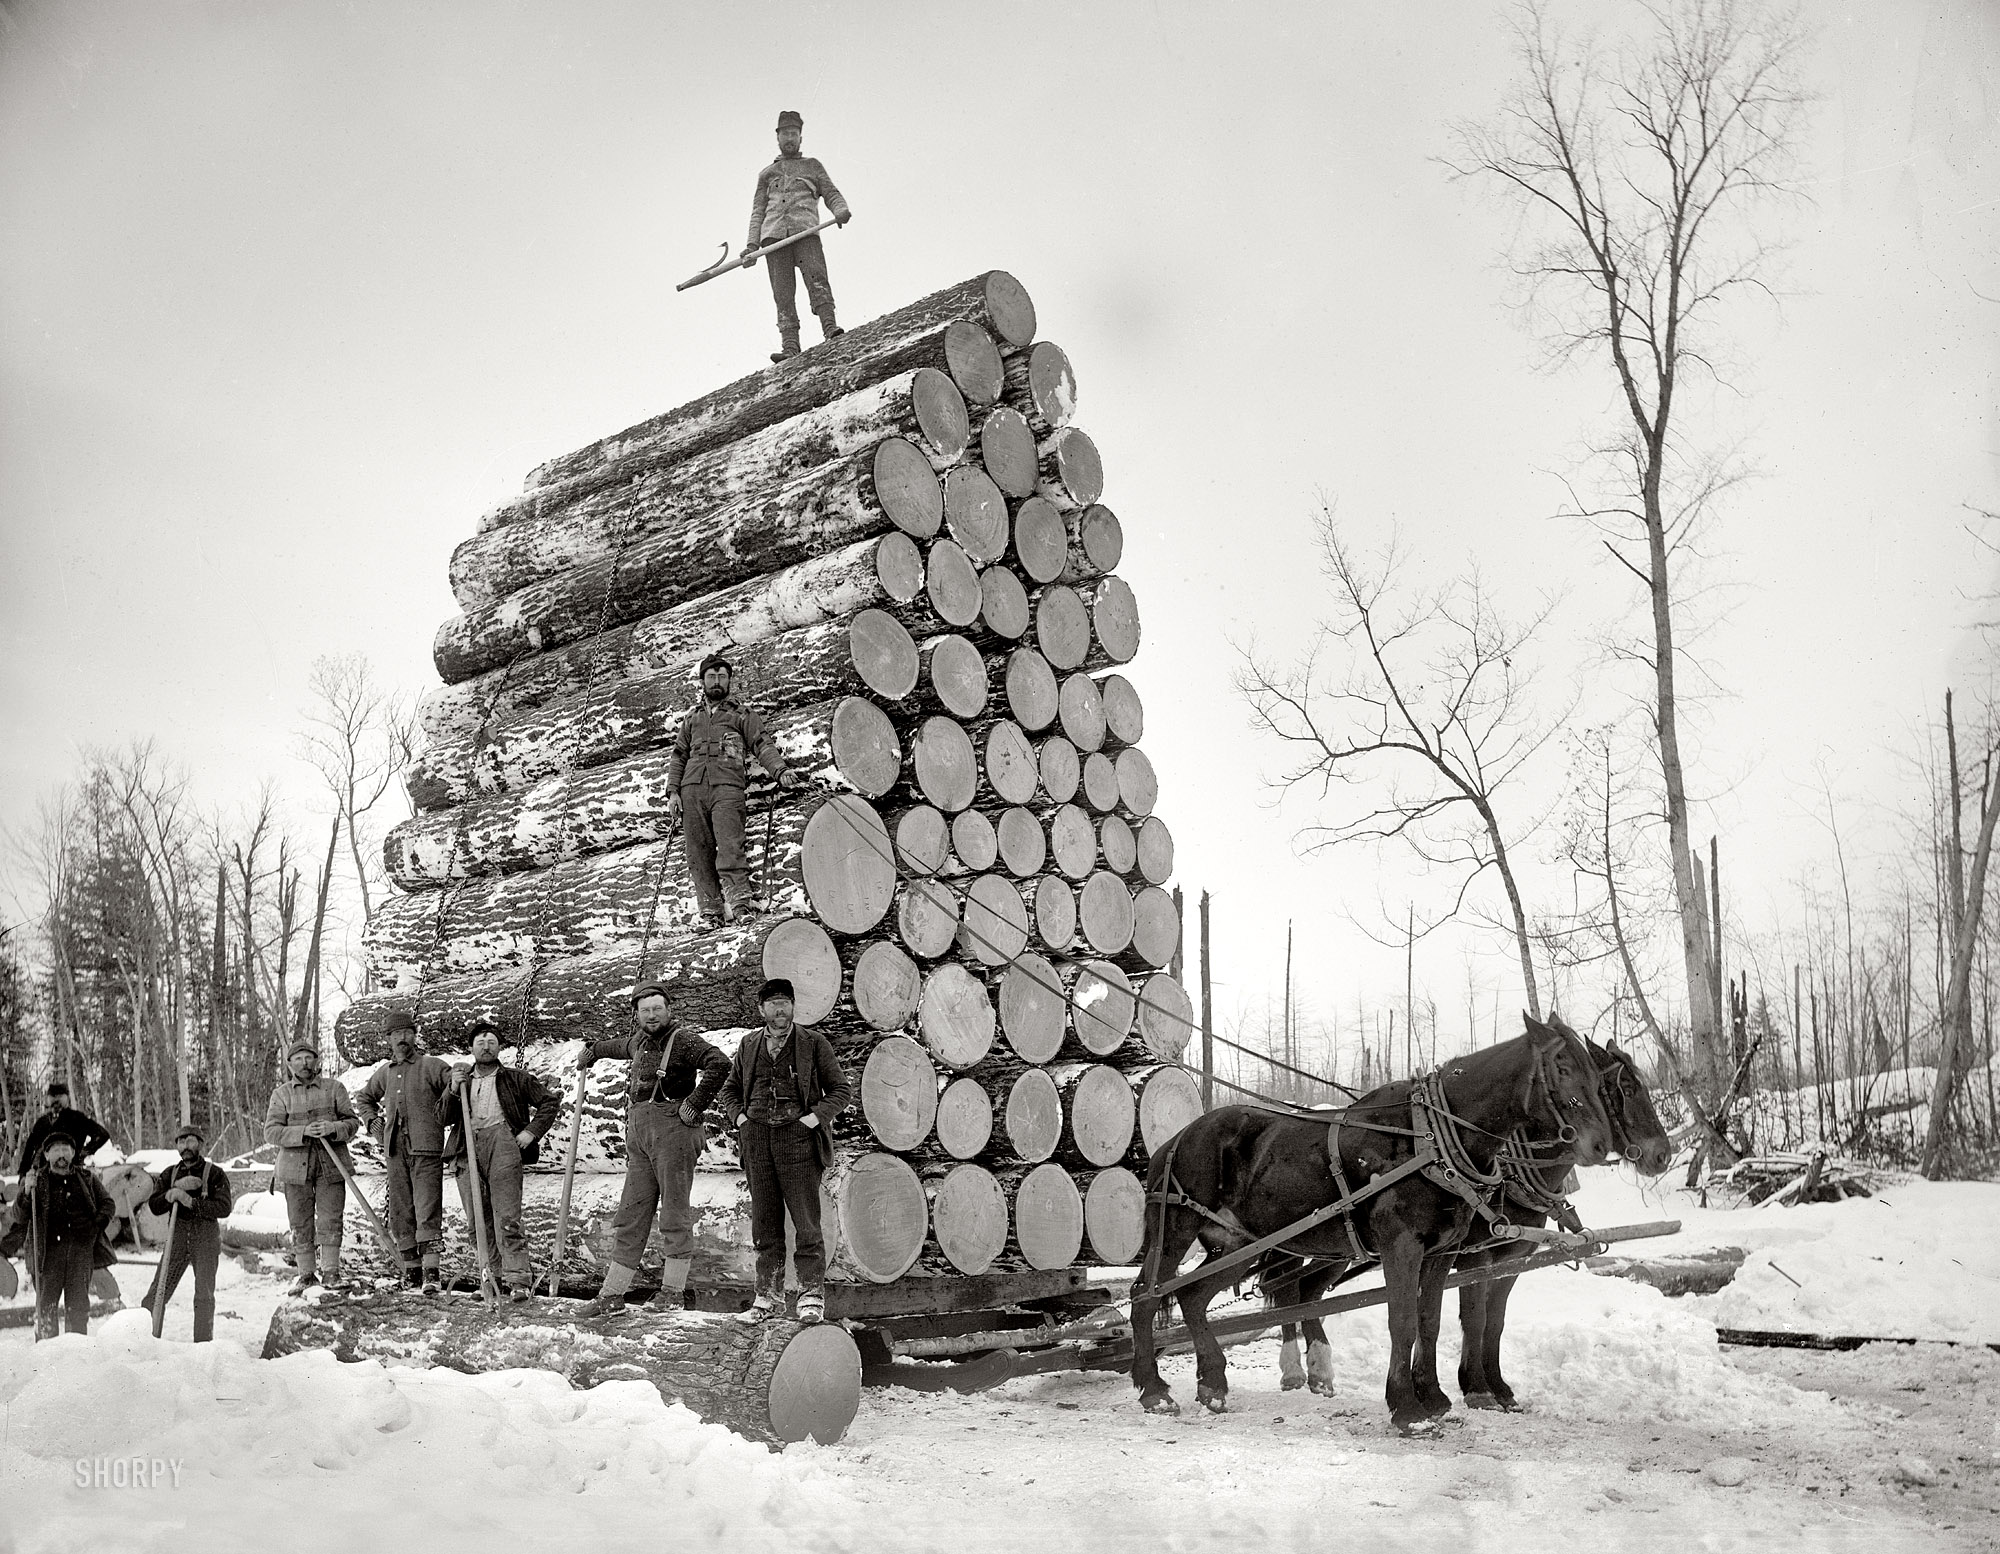 Michigan circa 1890s. "Logging a big load." Continuing our Michigan travelog. 8x10 inch dry plate glass negative, Detroit Publishing Company. View full size.